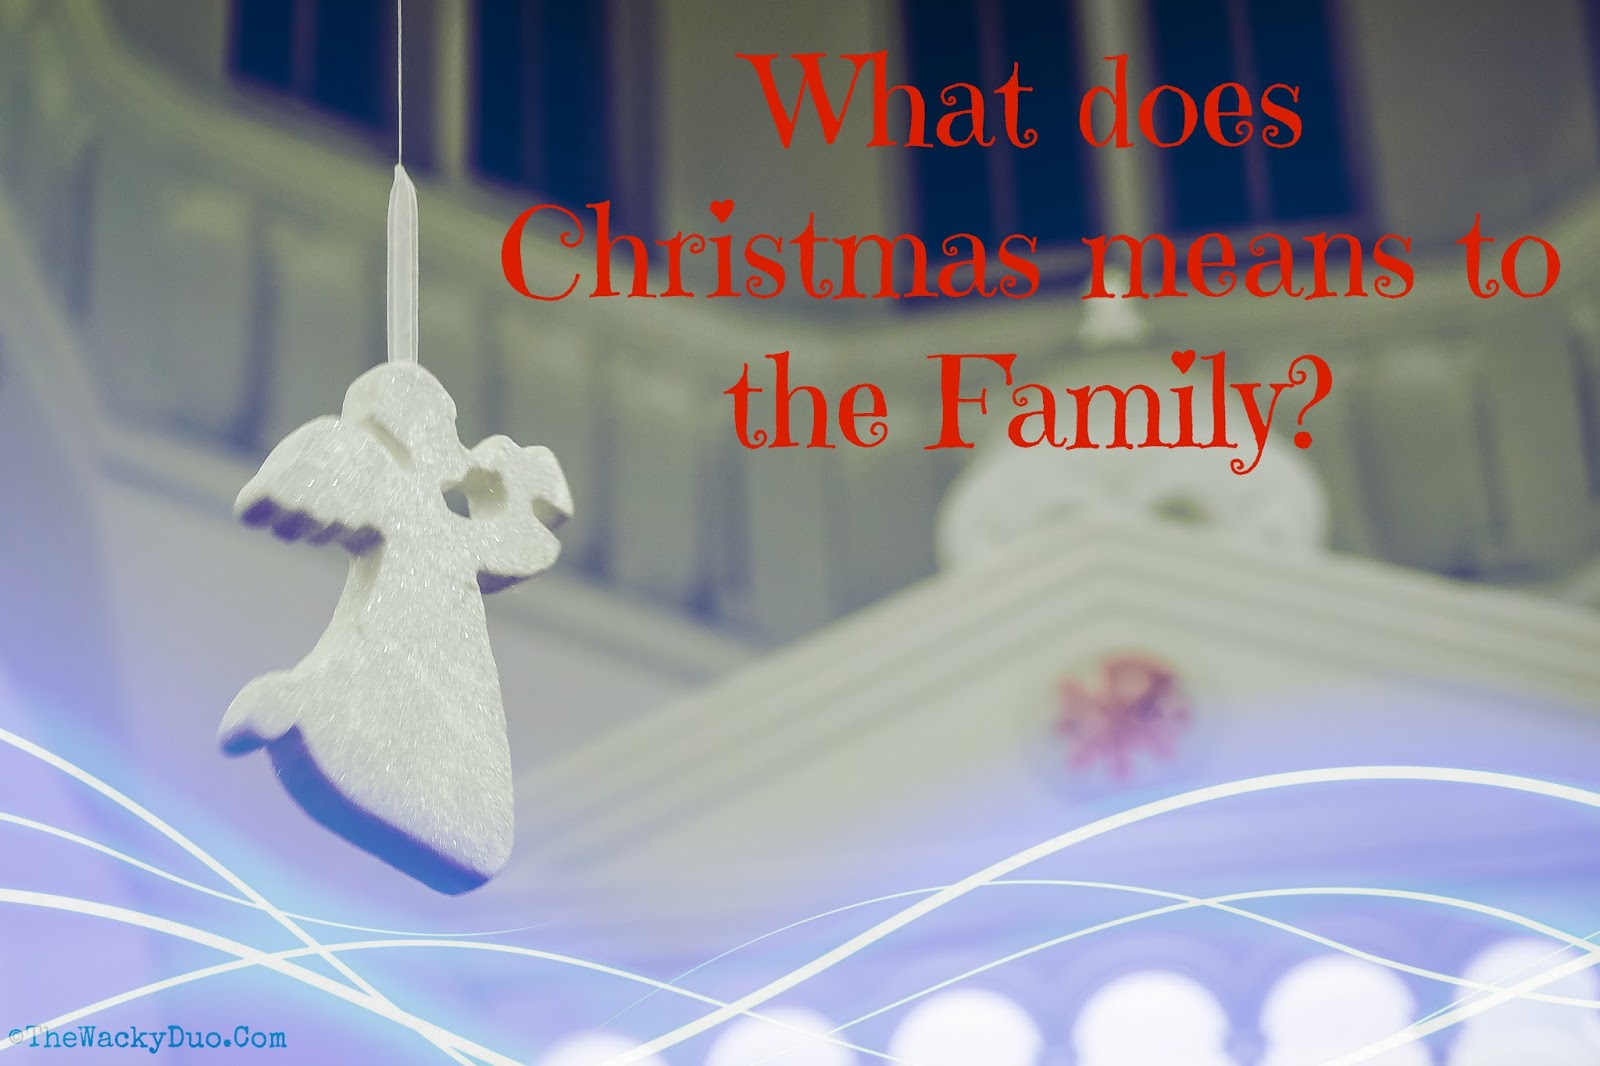 What does Christmas means to our family